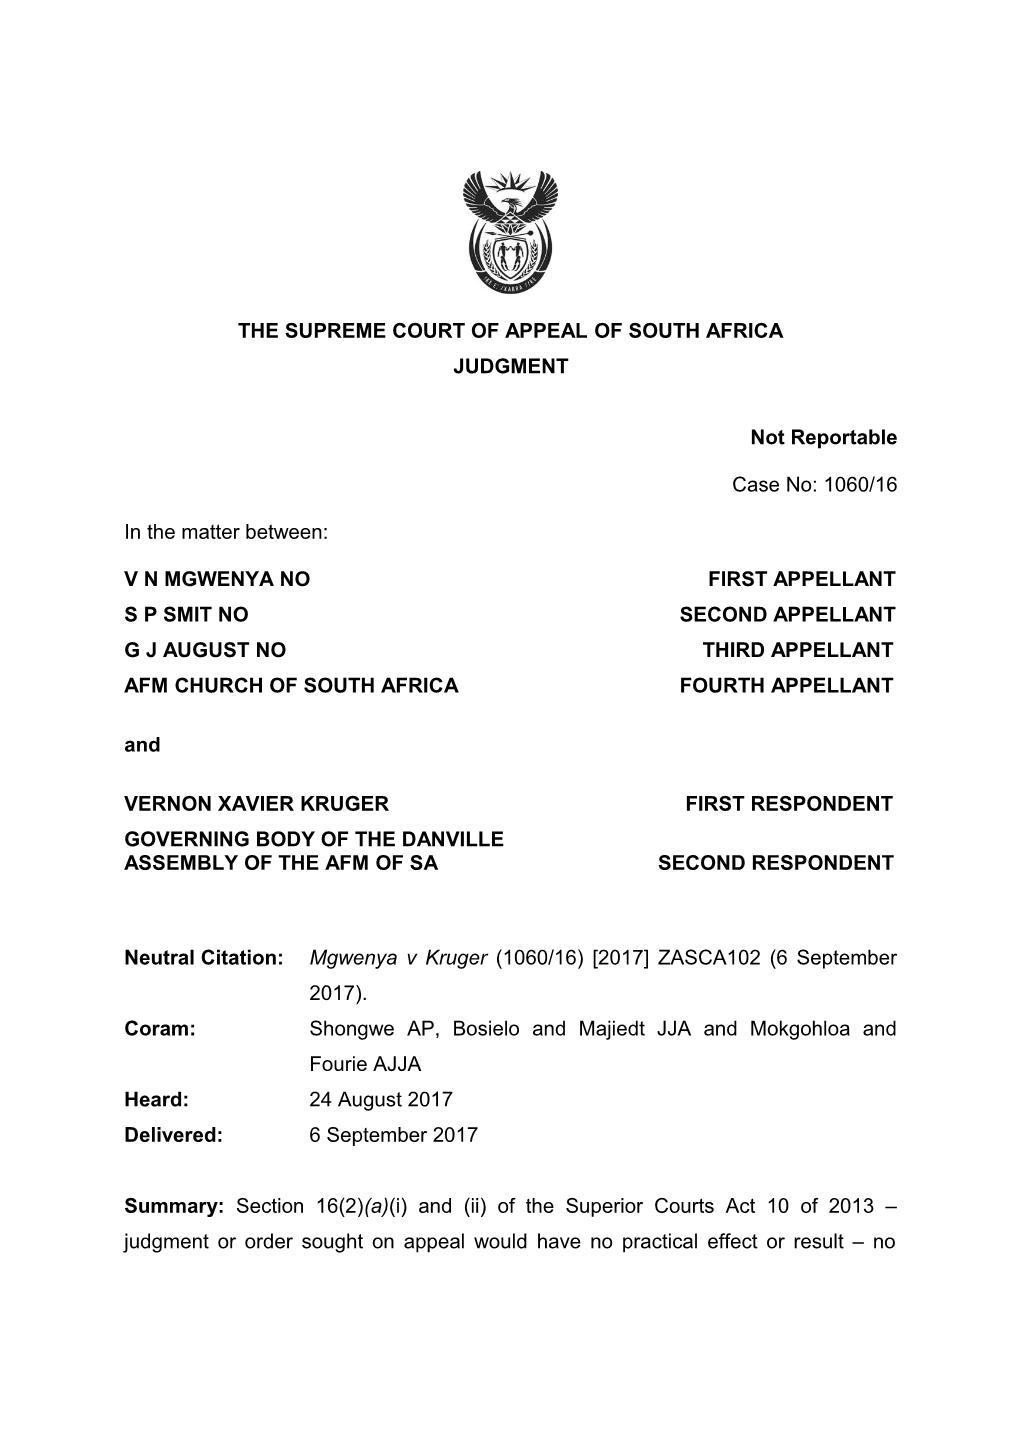 The Supreme Court of Appeal of South Africa s25